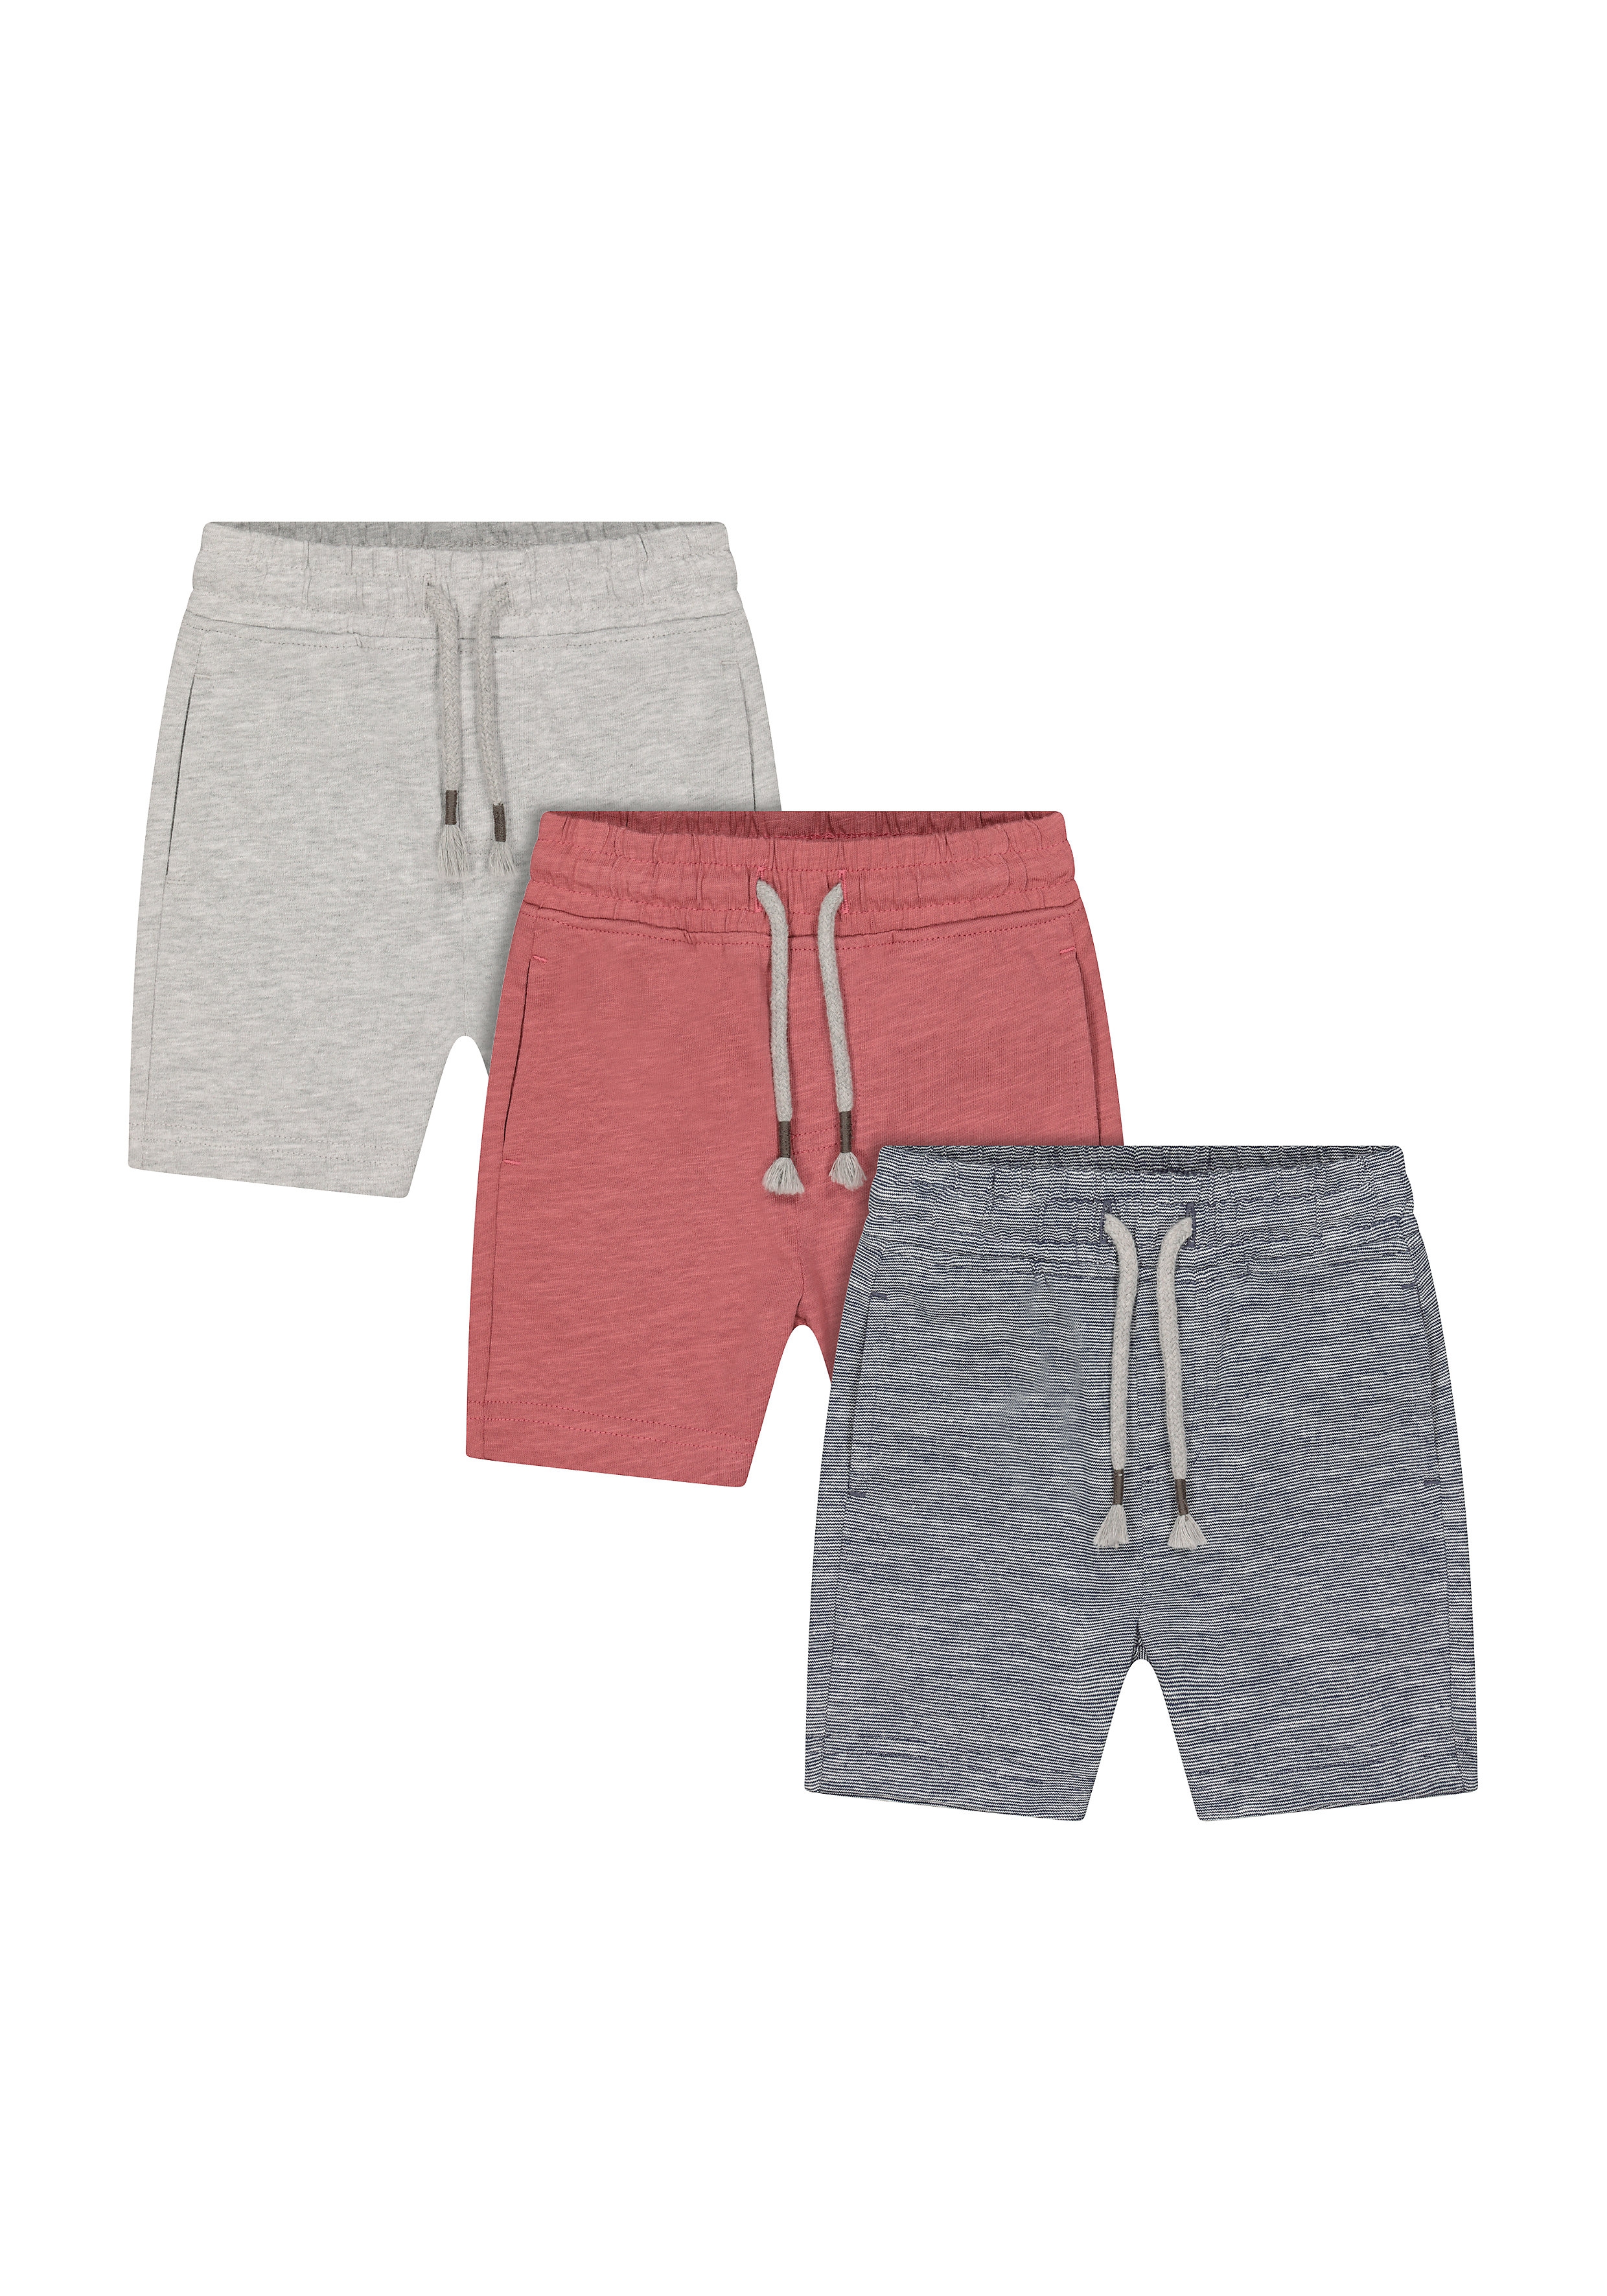 Mothercare | Boys Shorts Stripe And Boat Print - Pack Of 3 - Grey Red